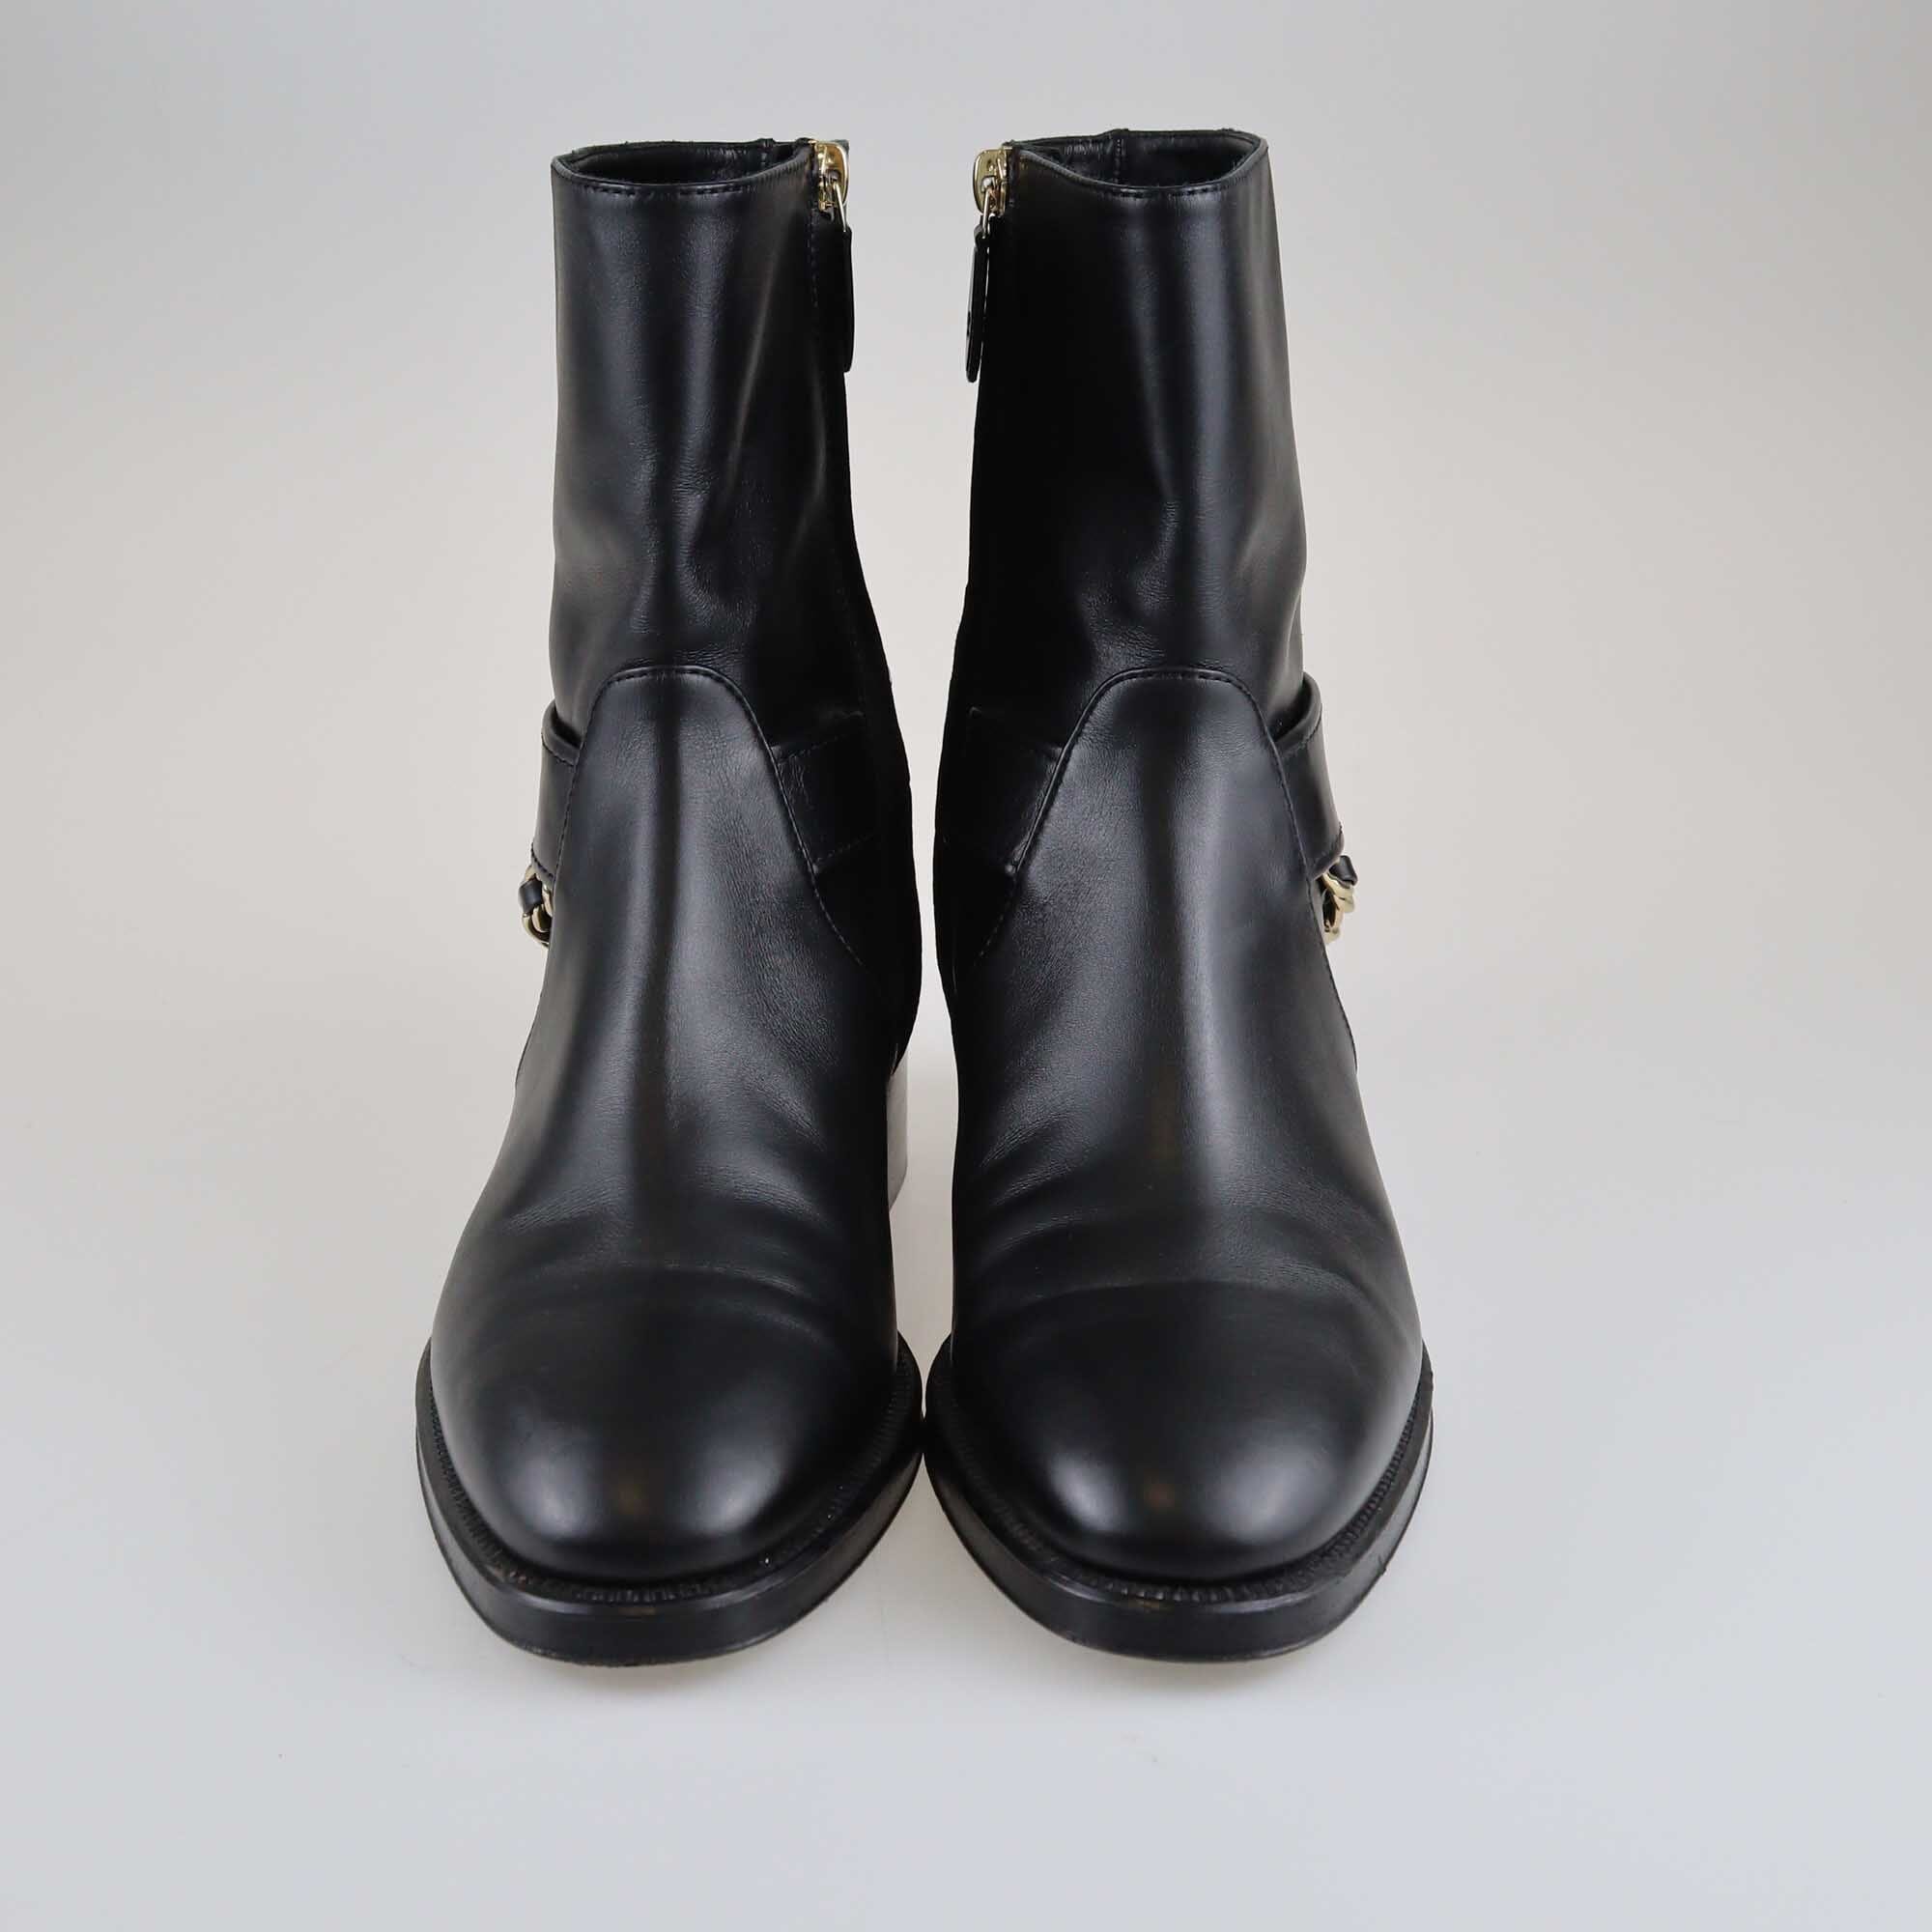 Chanel Black Leather Interlocking CC Boots Shoes Chanel 